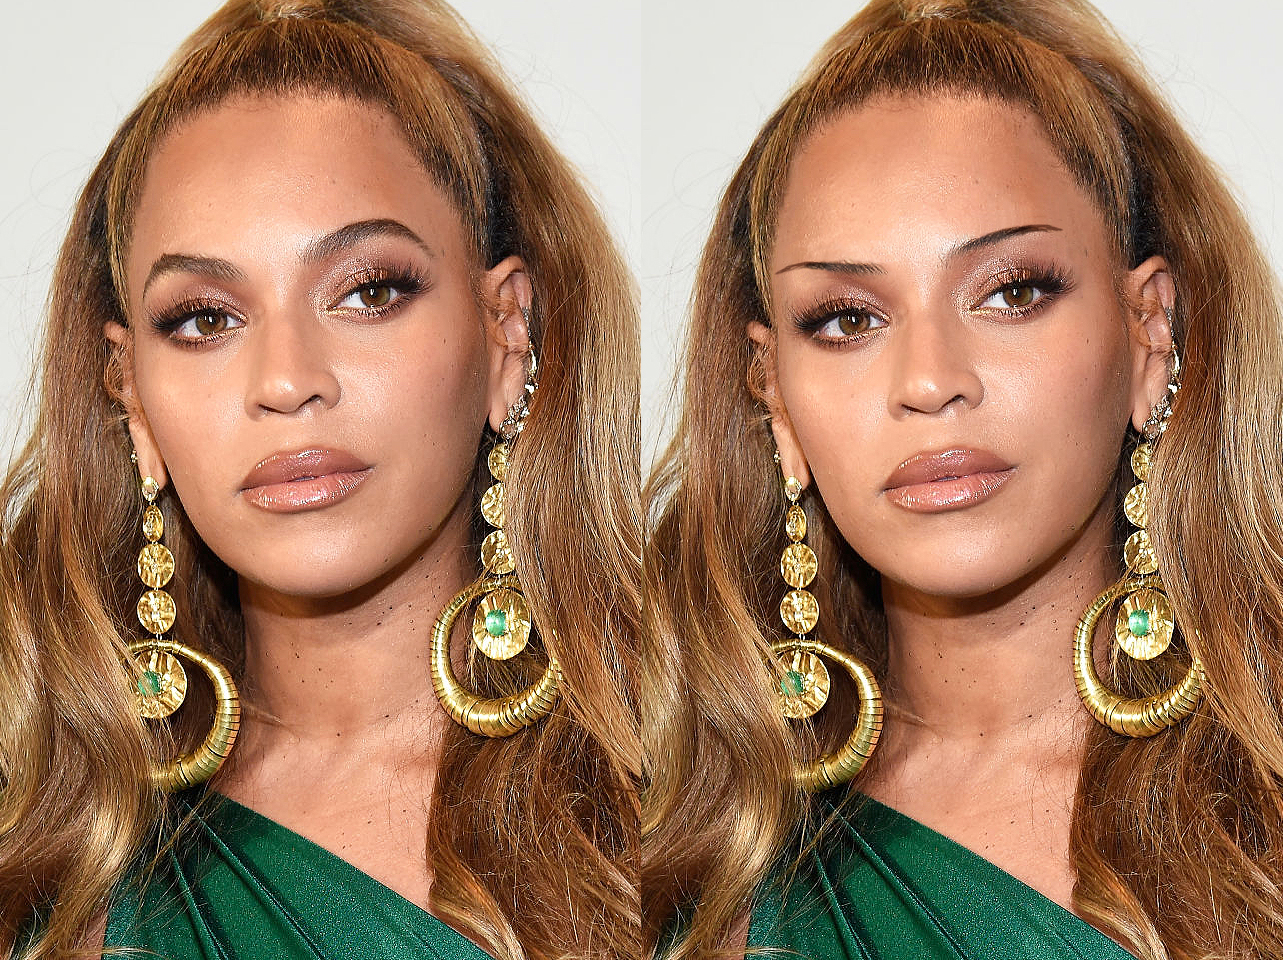 Beyonce's signature brows from 2017 vs digitally edited thin-brow look | Source: Getty Images